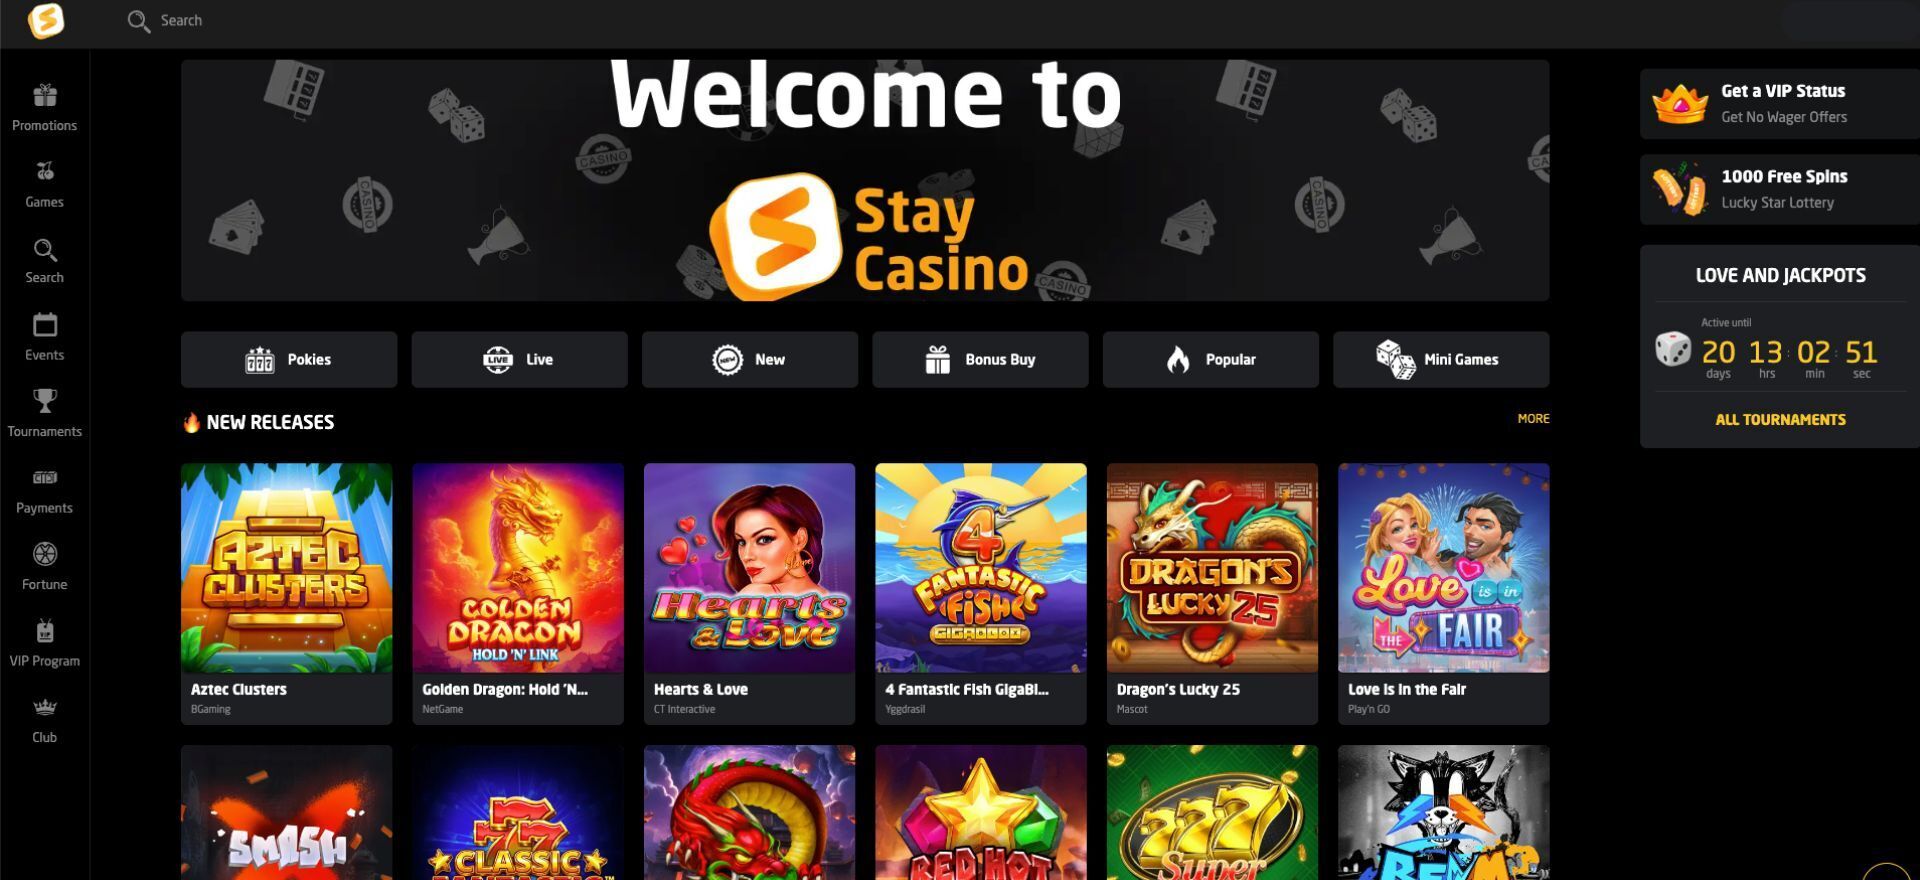 Stay Casino Welcome Page